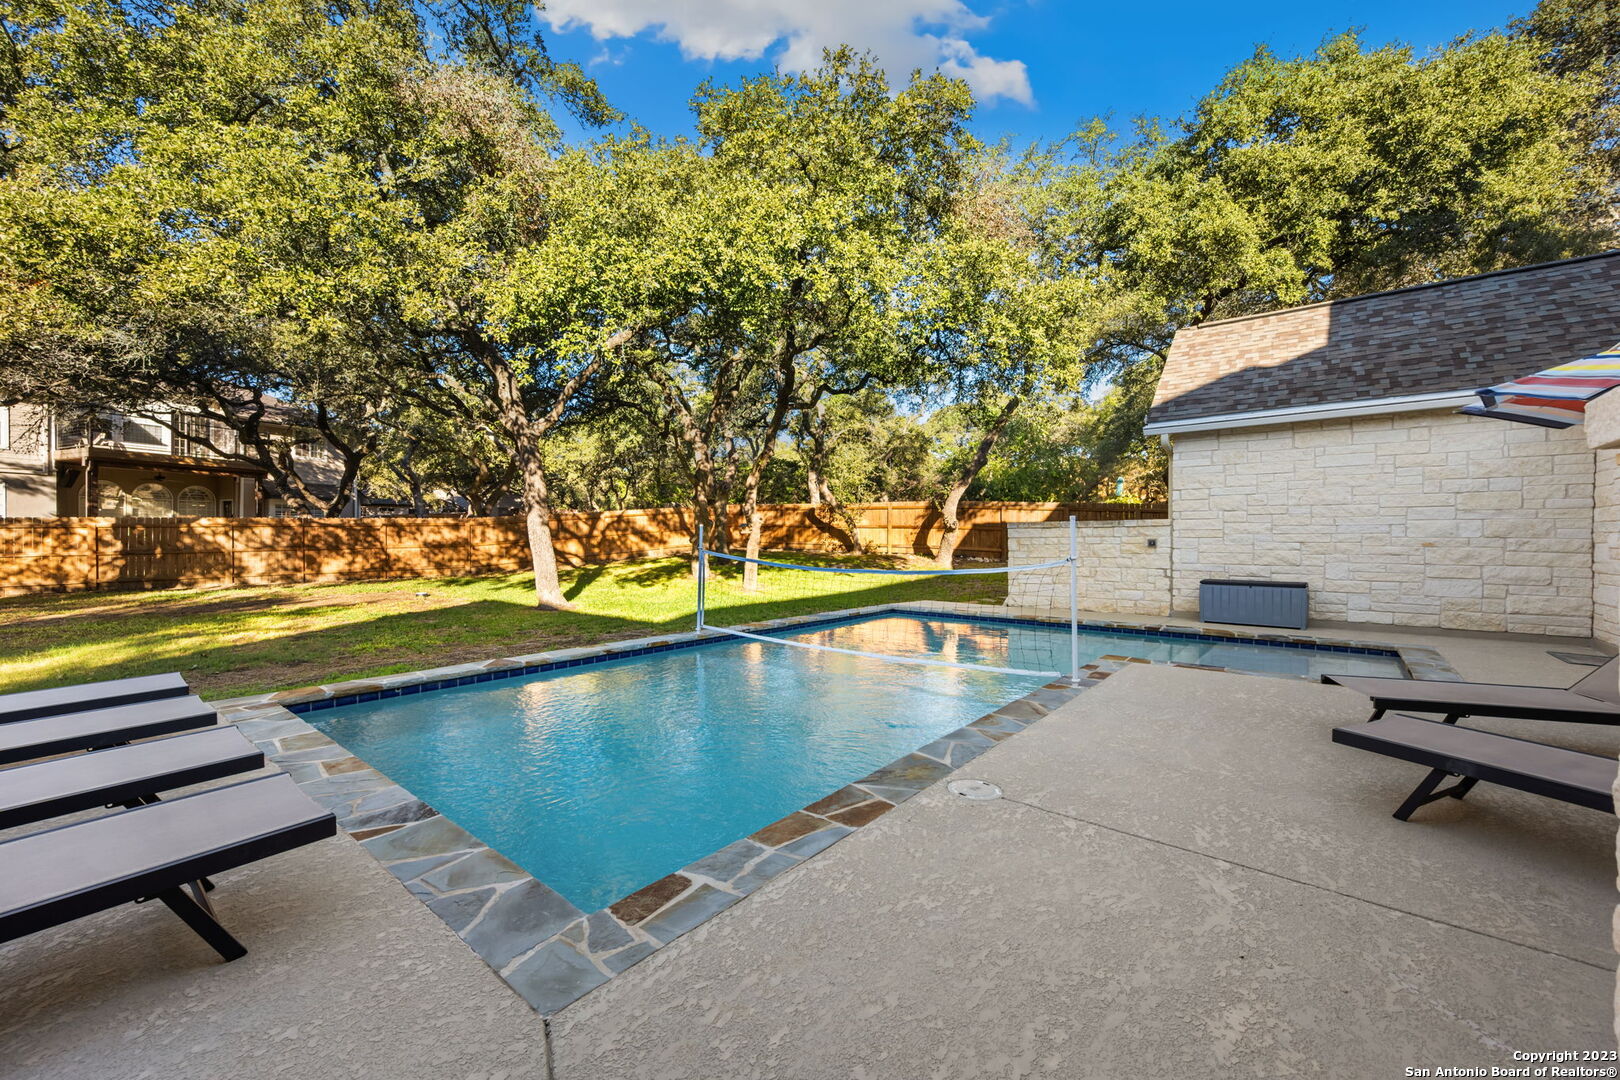 a view of swimming pool with outdoor seating and a yard